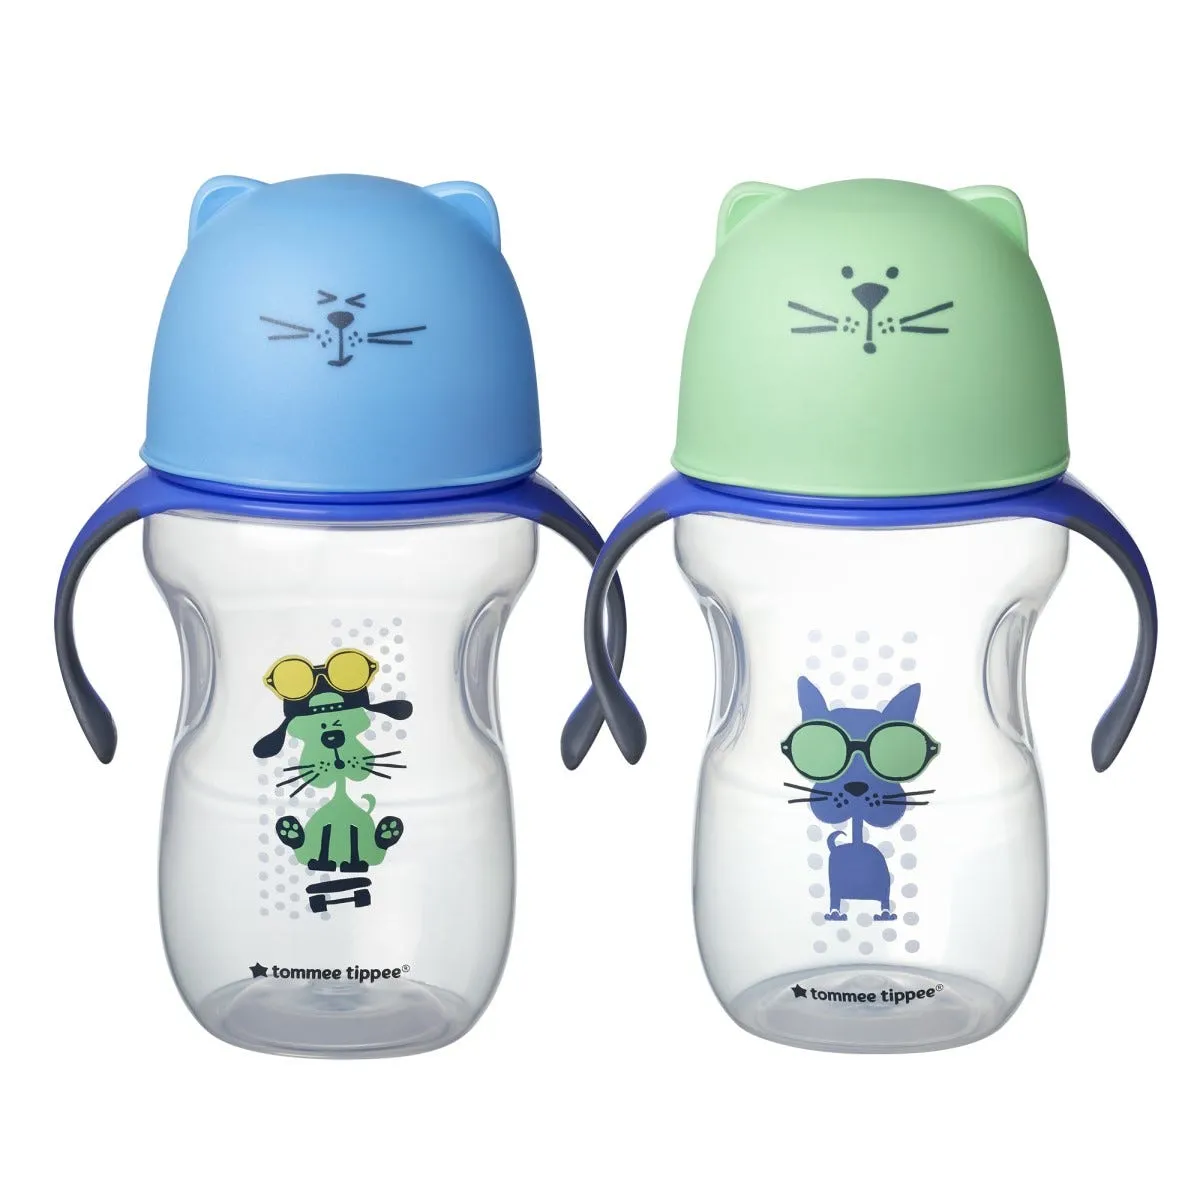 Tommee Tippee Soft Sippee Trainer cup leakproof cap 12+months 10oz 